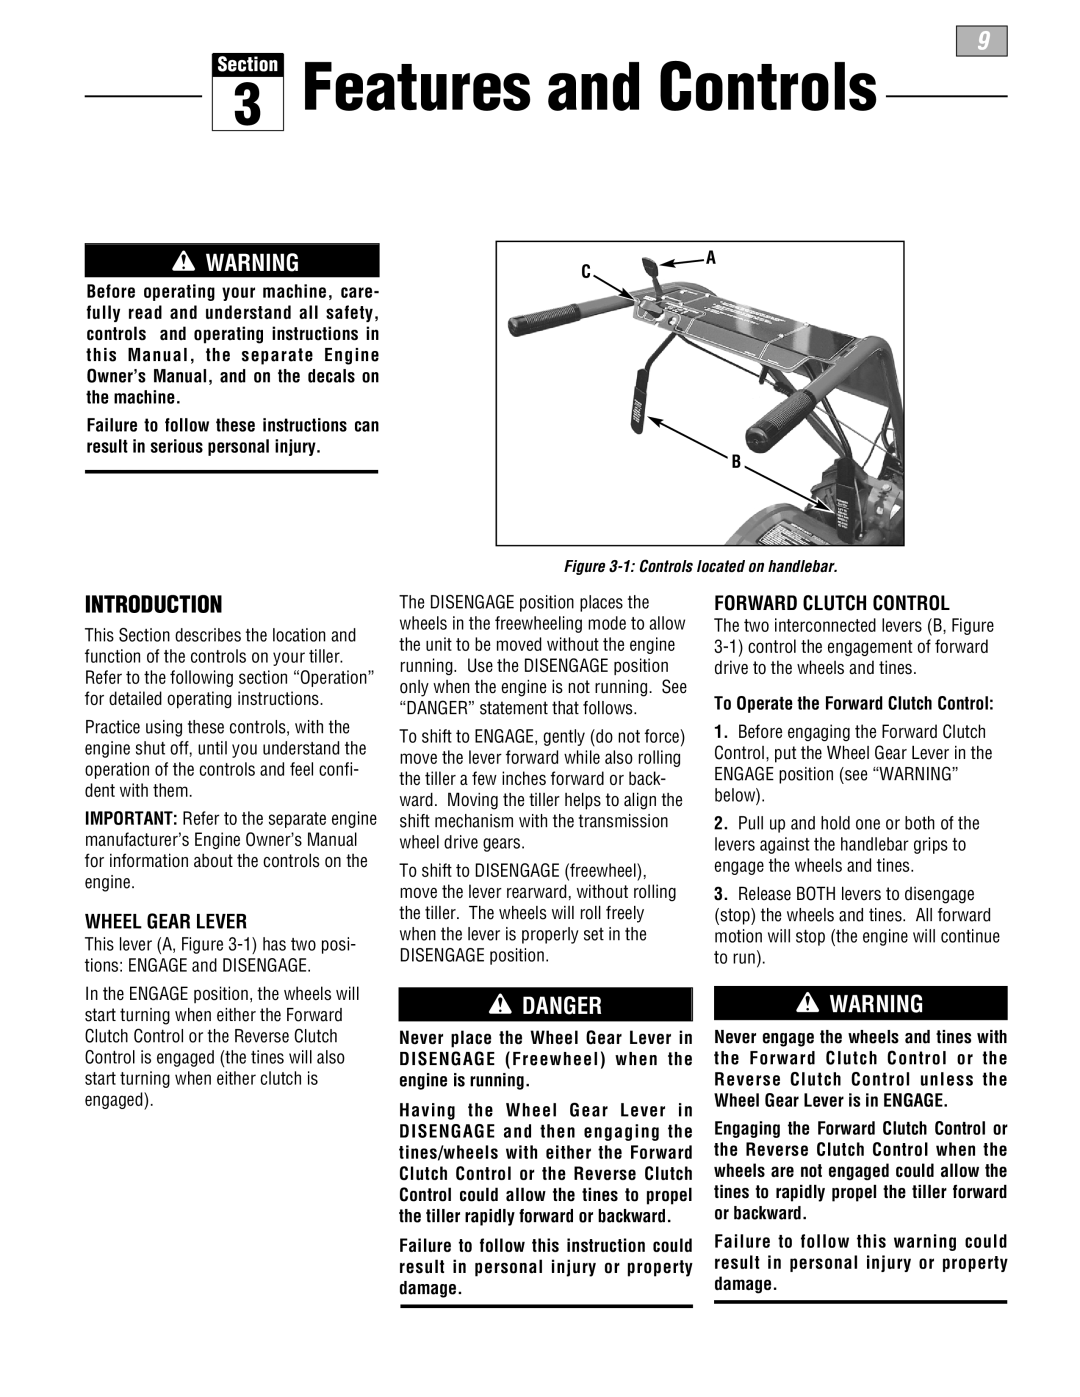 Troy-Bilt 664D-Pony manual Danger, Wheel Gear Lever, To Operate the Forward Clutch Control, Features and Controls 